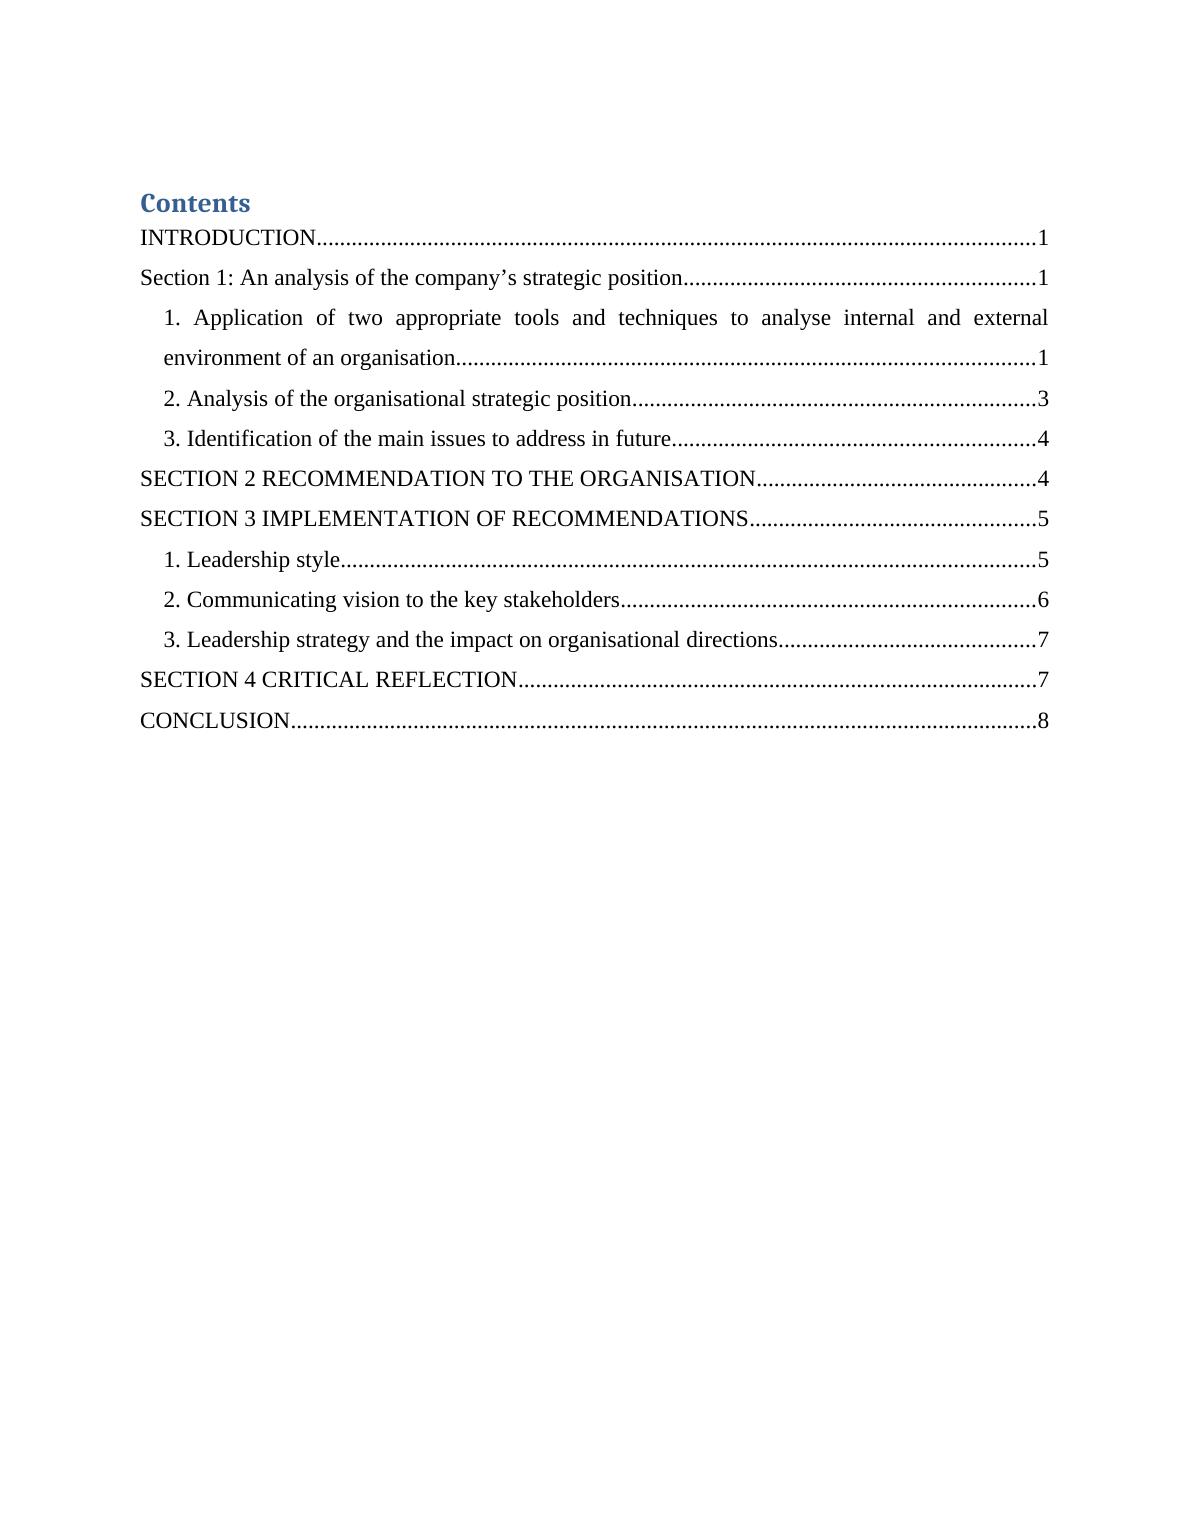 Professional Development: Analysis of Strategic Position and Recommendations_2